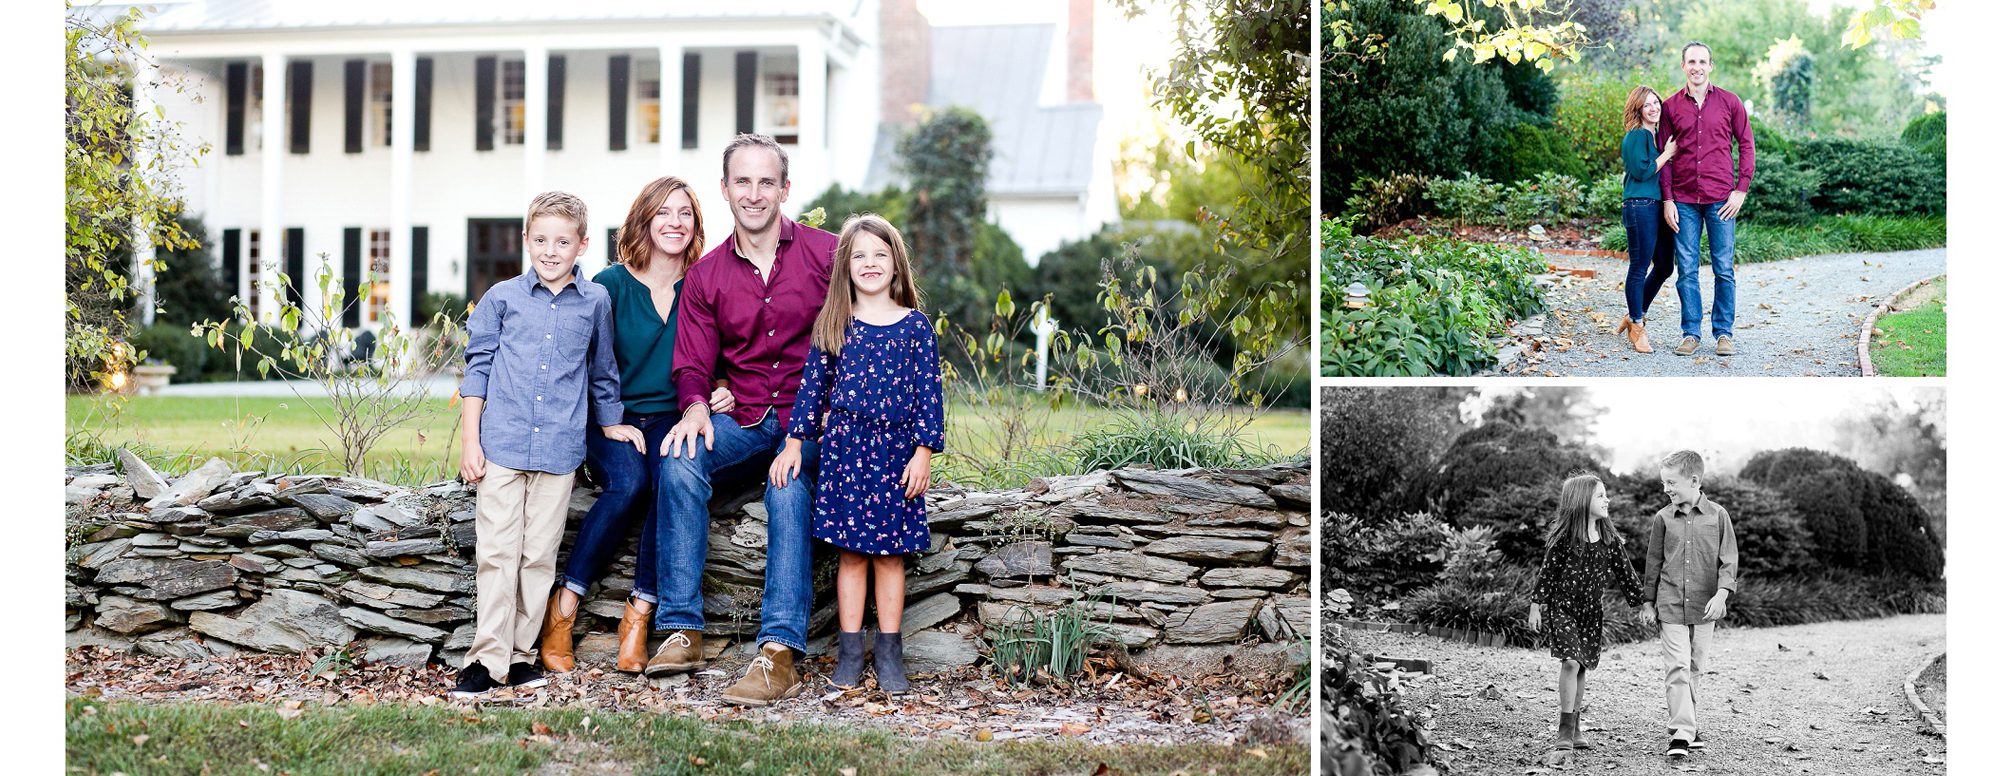 charlottesville family portraits pictures clifton albemarle county photographer